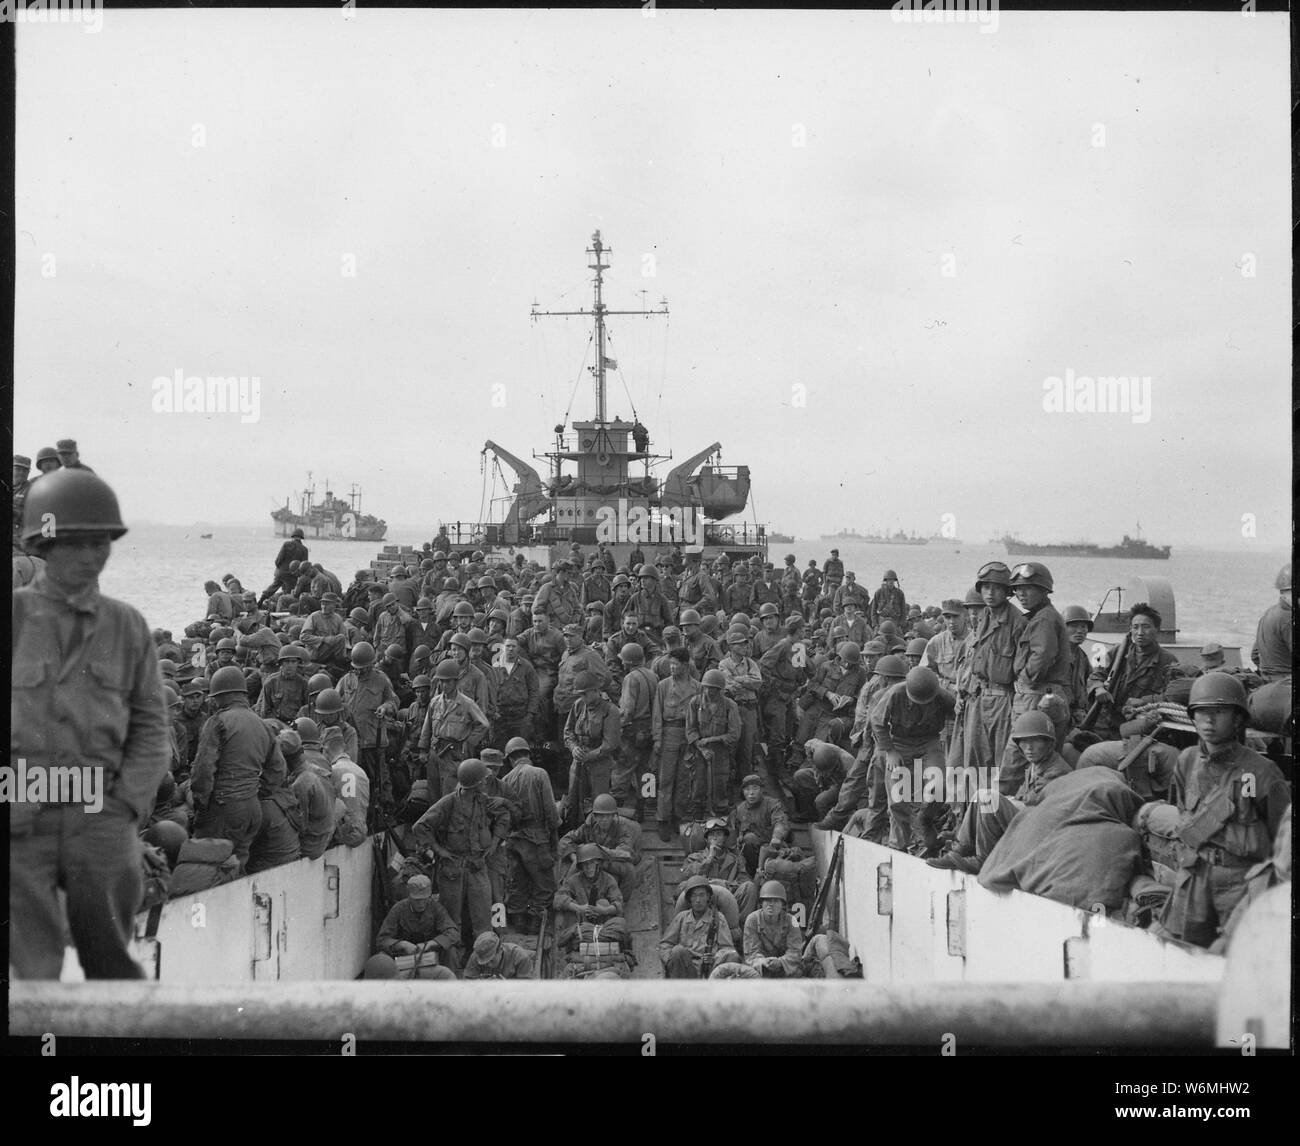 Troops of the 31st Infantry Regiment land at Inchon Harbor, Korea, aboard LST's.; General notes:  Use War and Conflict Number 1383 when ordering a reproduction or requesting information about this image. Stock Photo